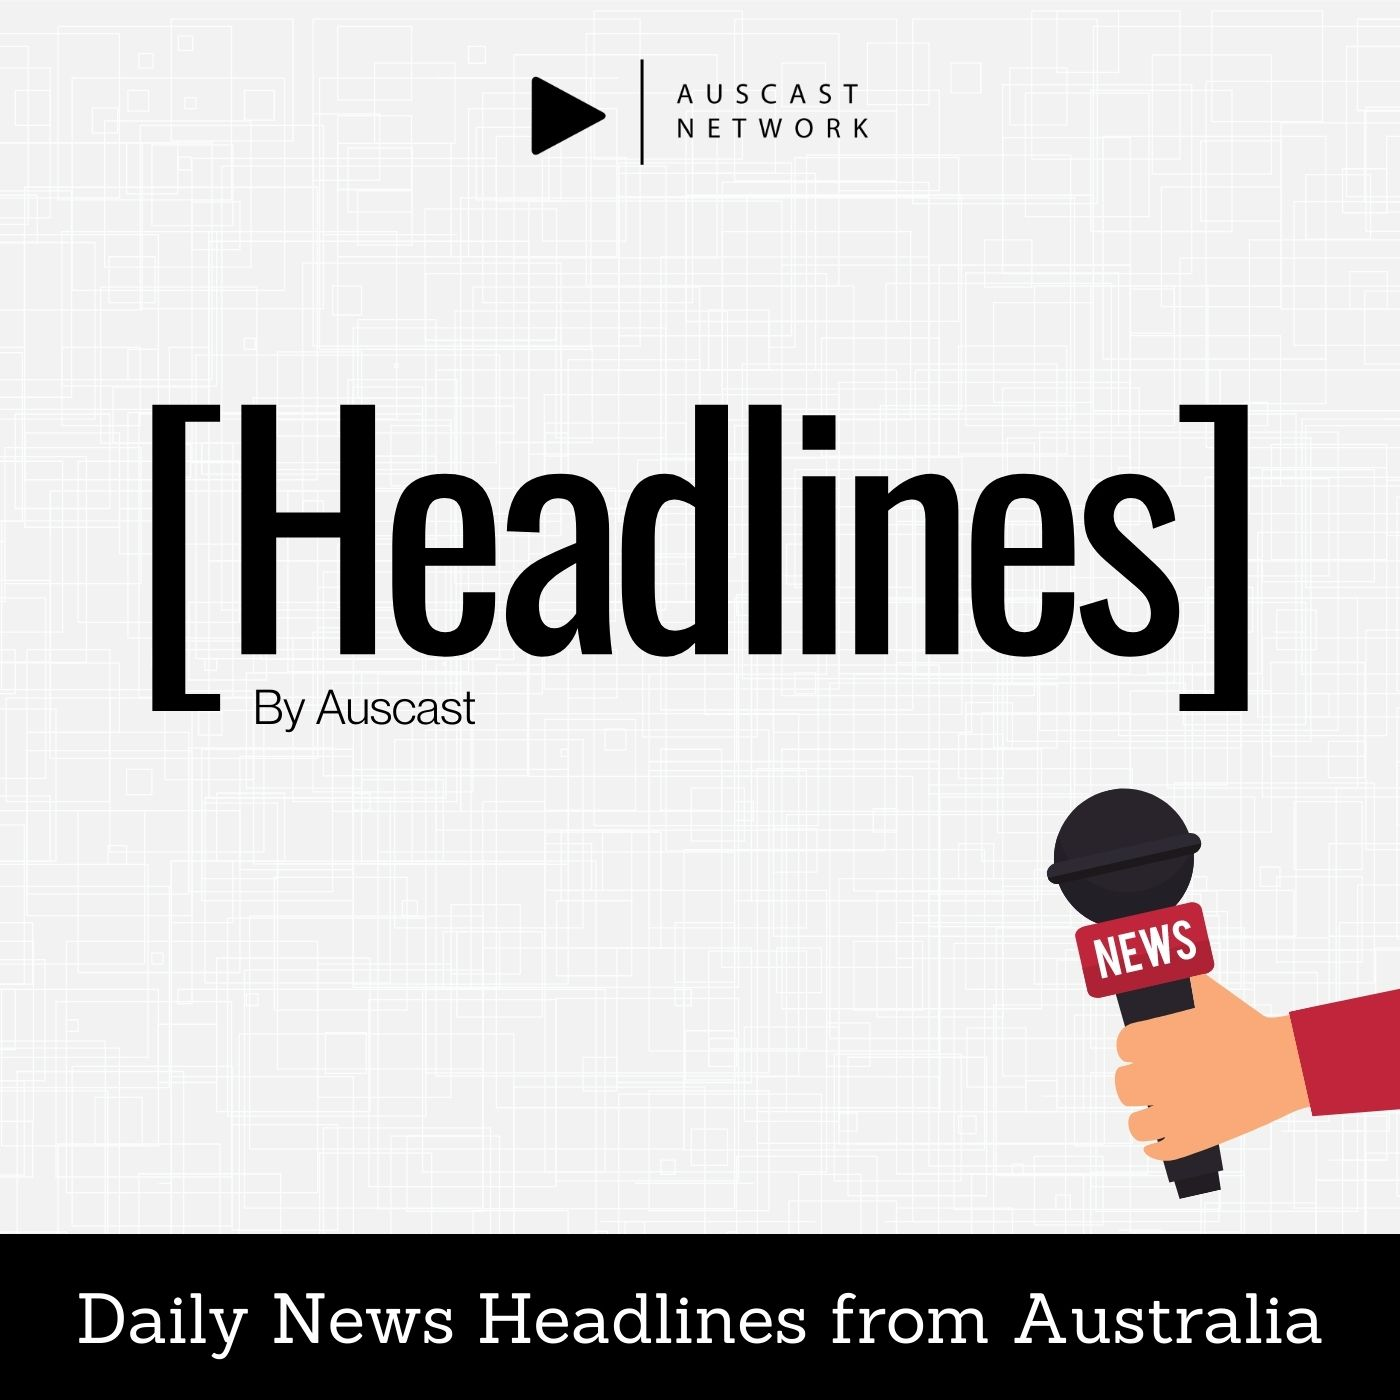 Prince Phillip, Royal Commission into Aged Care , North Queensland Cyclone and more - Headlines by Auscast